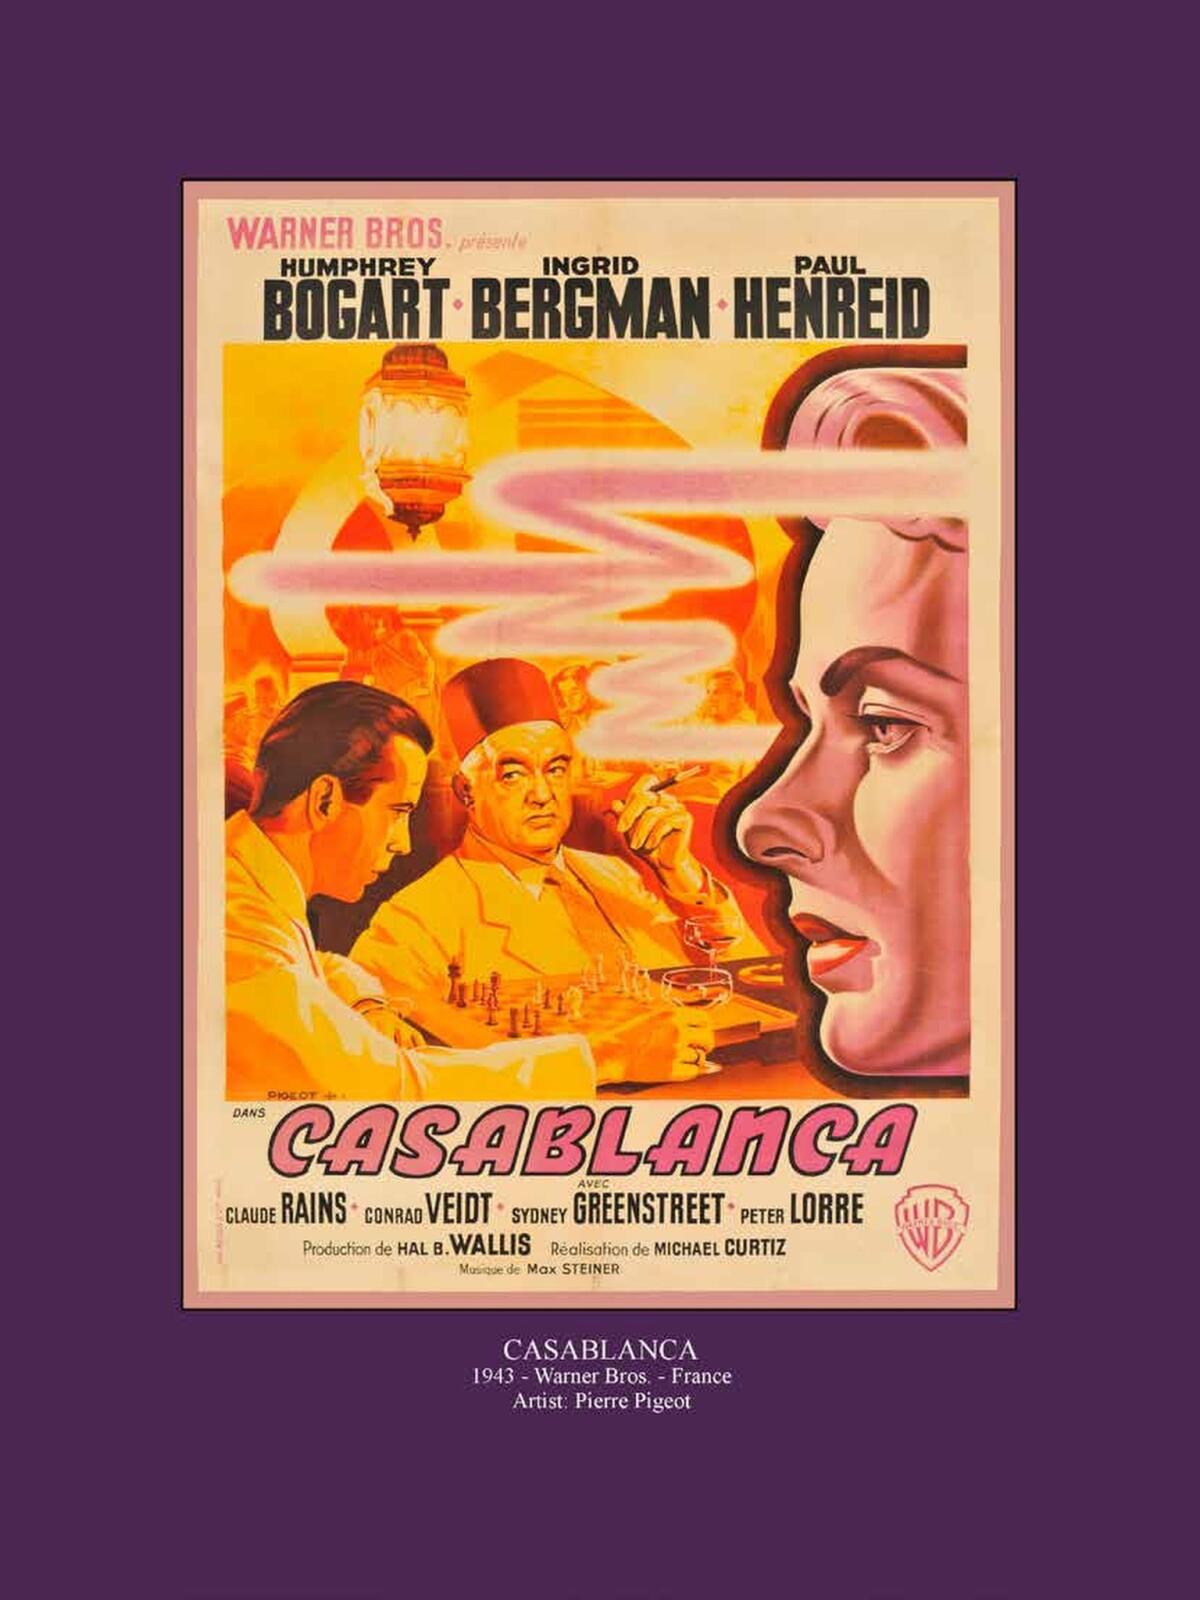 The French poster for "Casablanca."